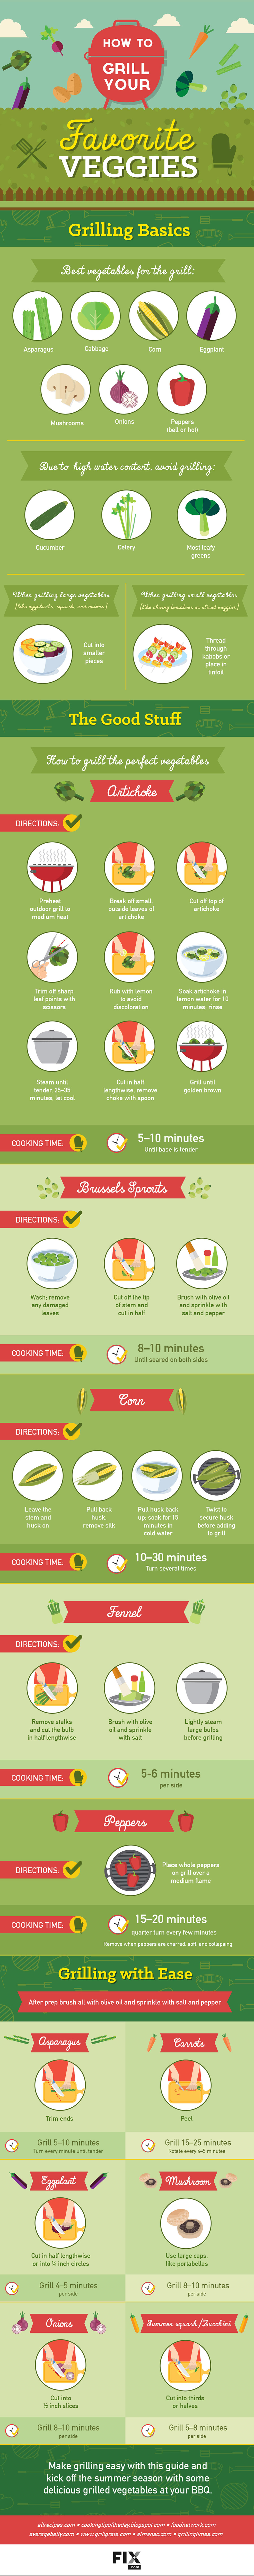 How to Grill Your Favorite Veggies Infographic